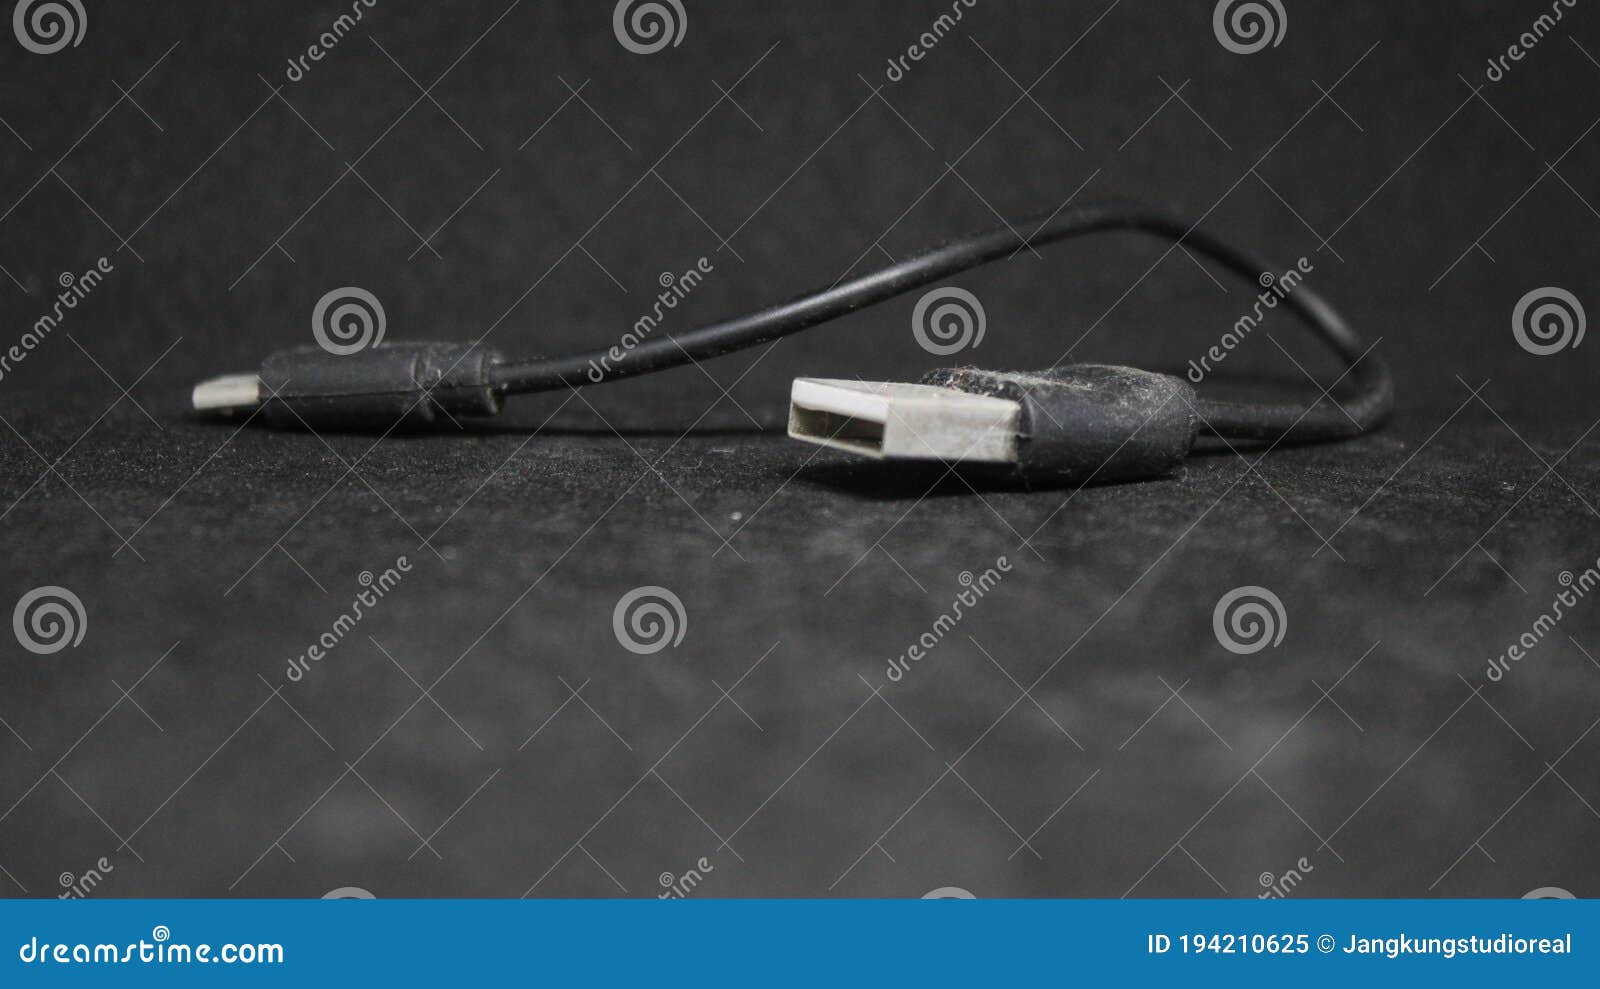 cable usb on a background black